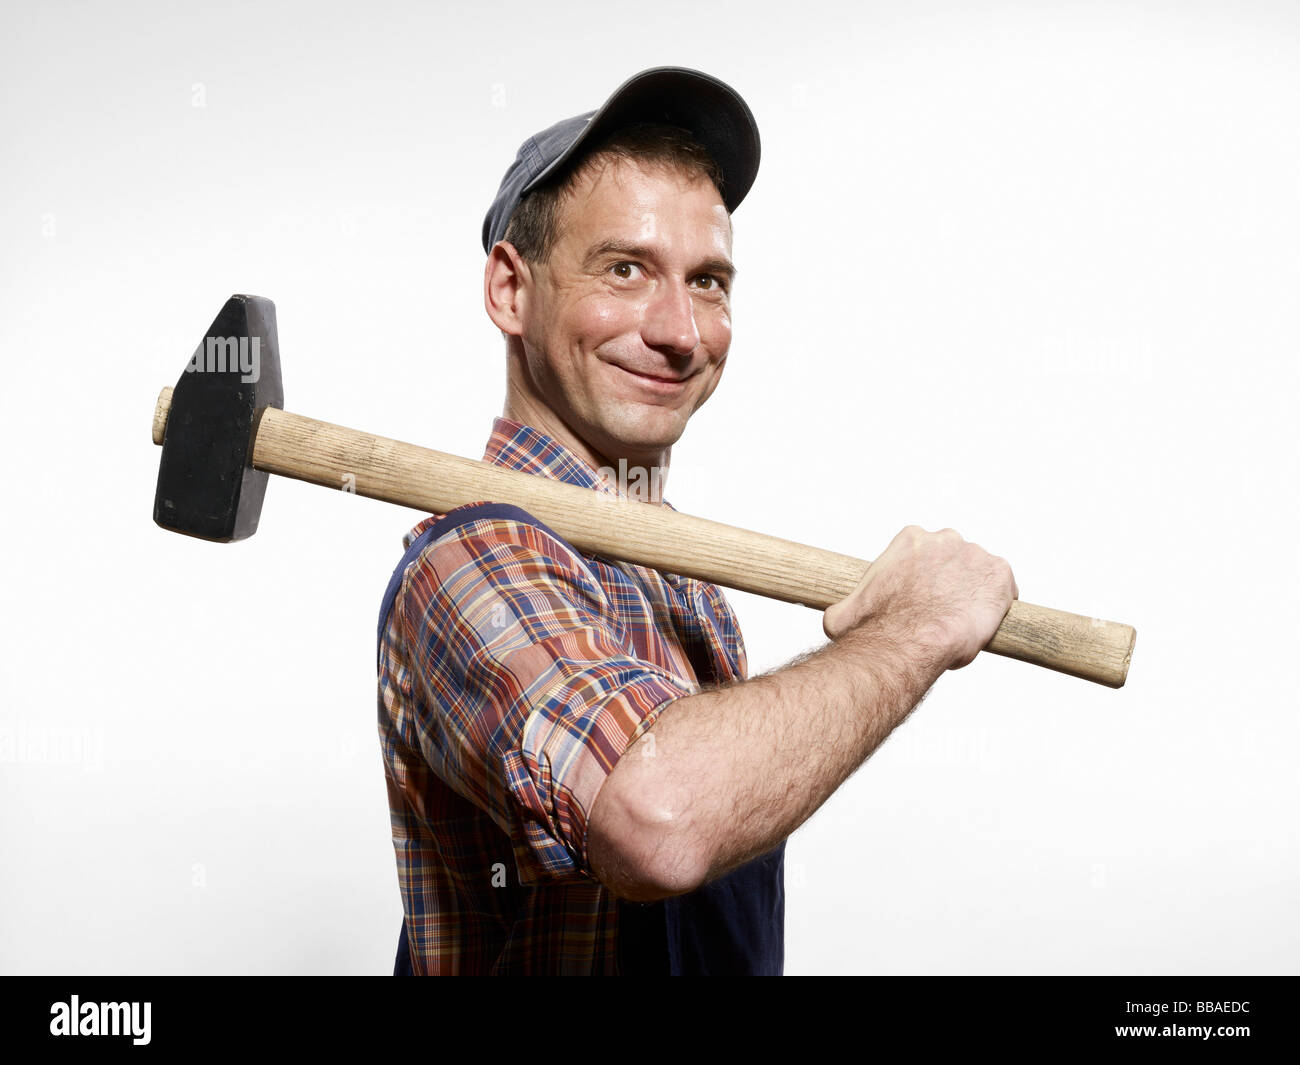 A man holding a sledgehammer over his shoulder Stock Photo - Alamy